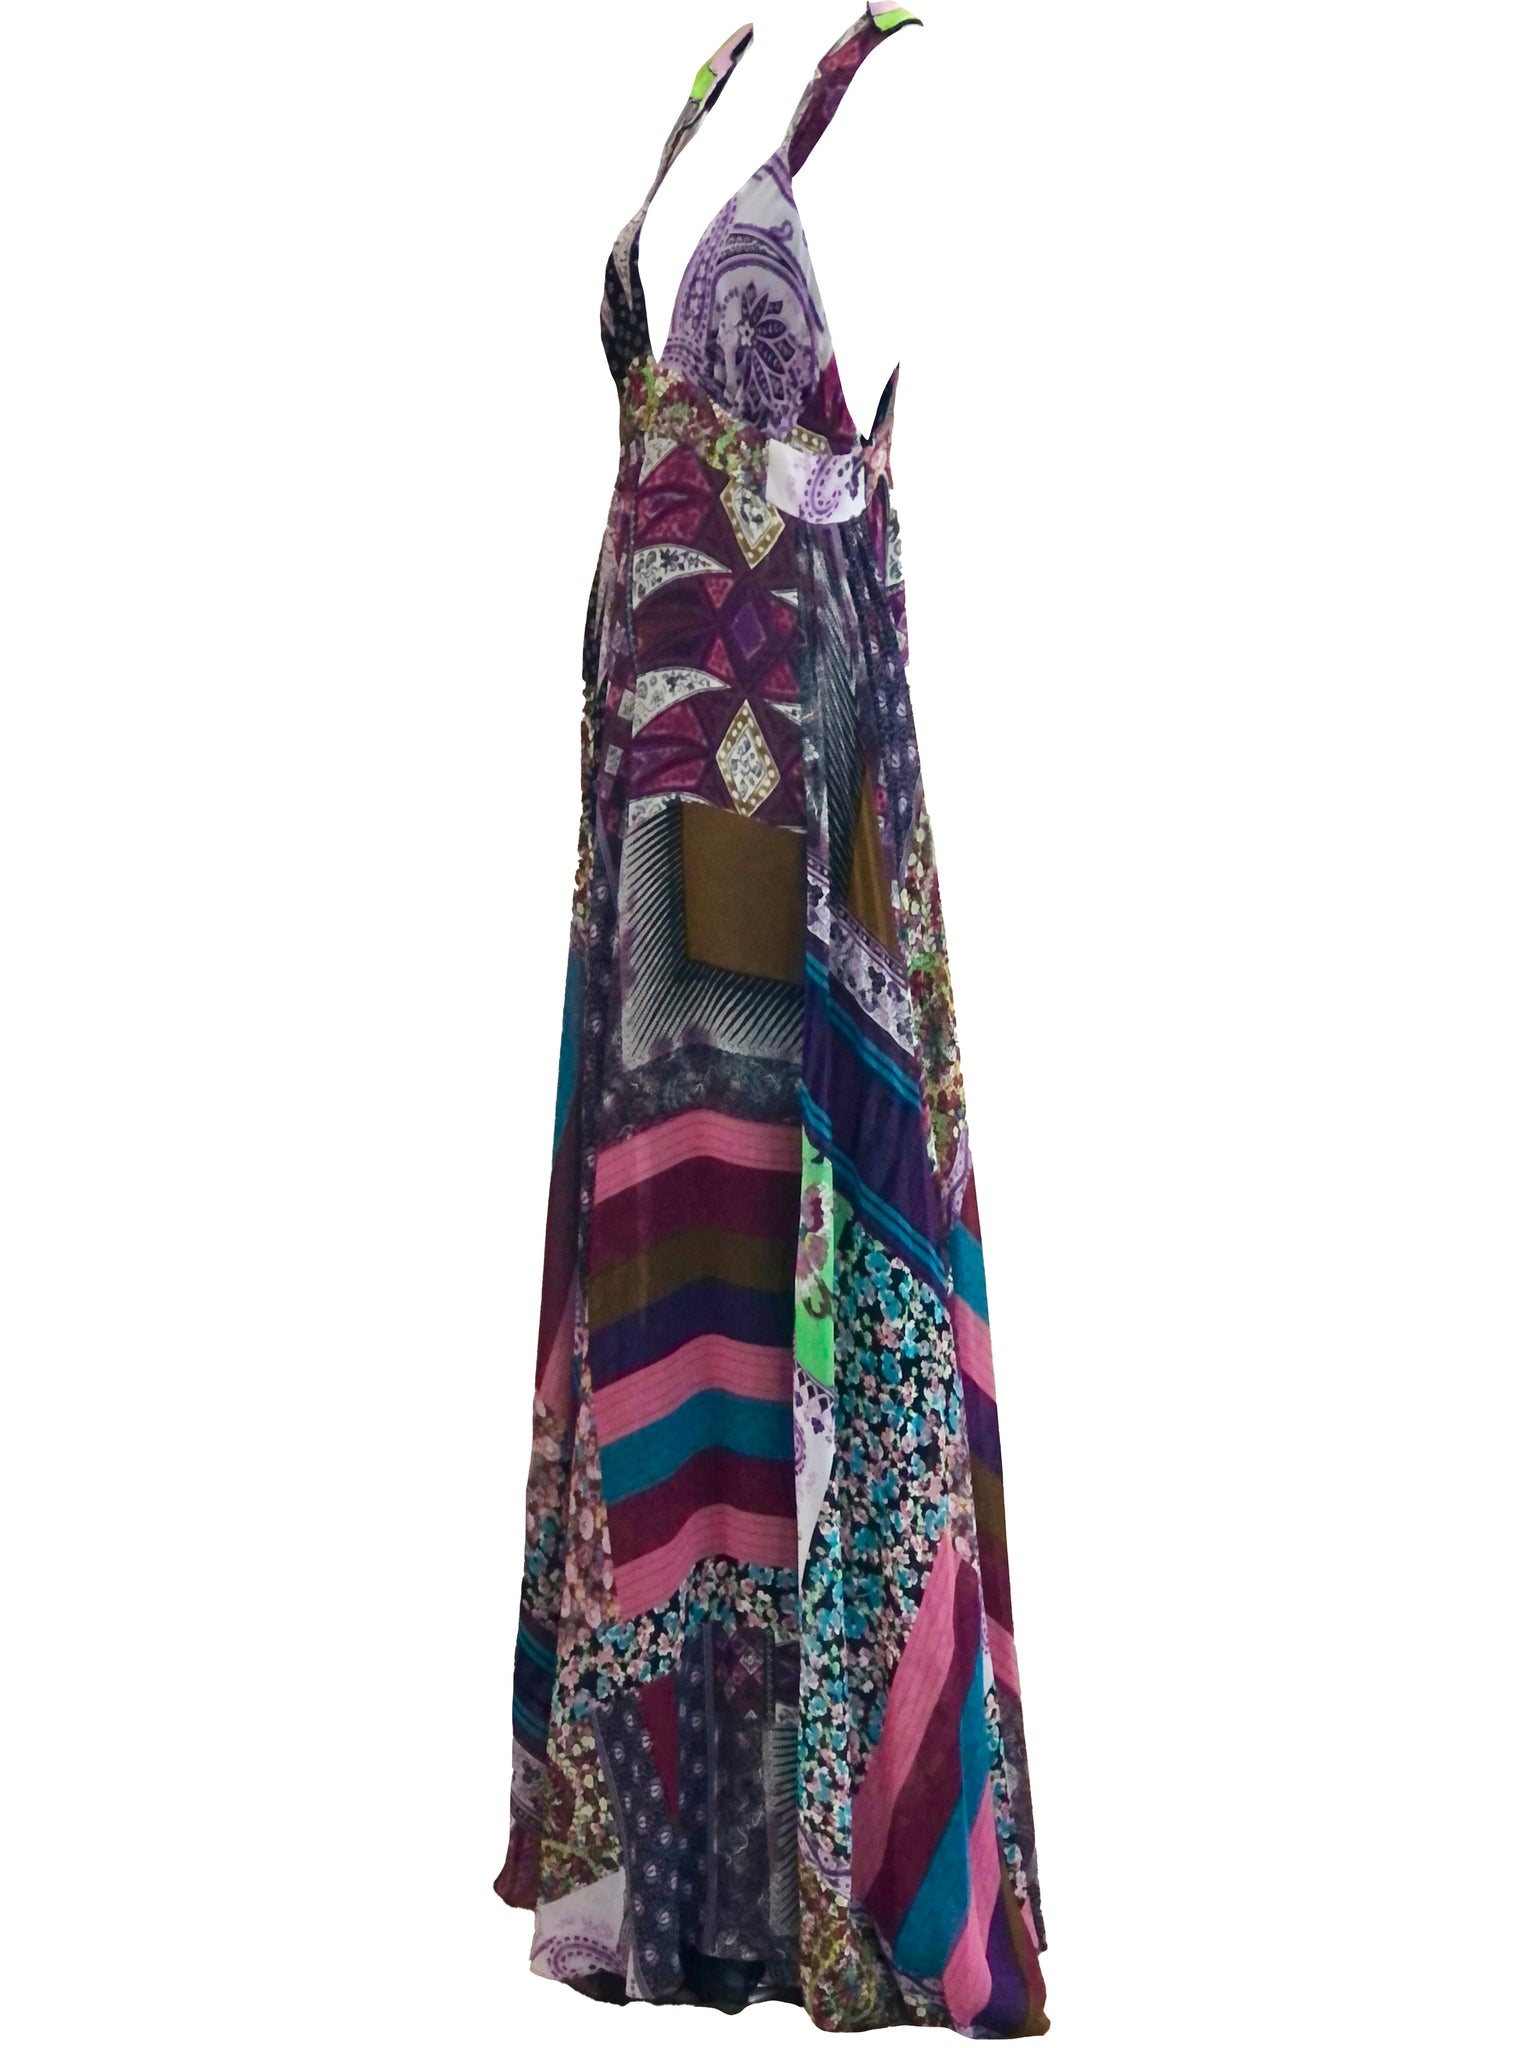 Etro Contemporary Patchwork Print Gown SIDE 2 of 7